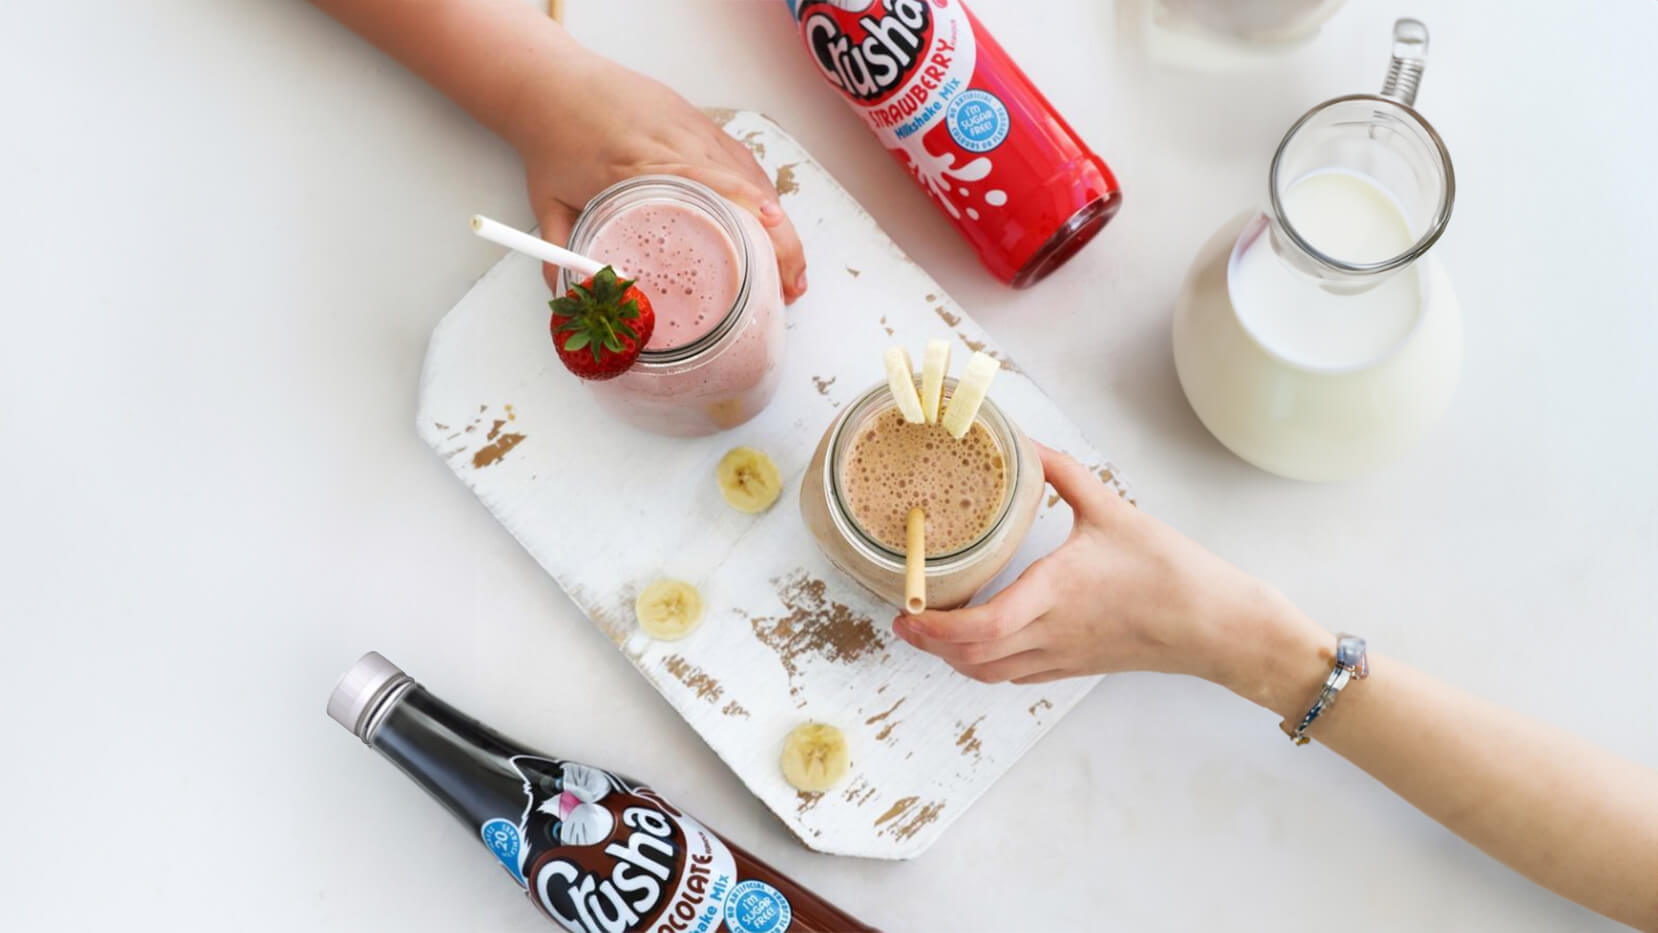 Strawberry and banana milkshakes in glass jars with fresh fruit on a countertop alongside Crusha Milkshake bottles, with two chidlren's hands reaching to grab them.